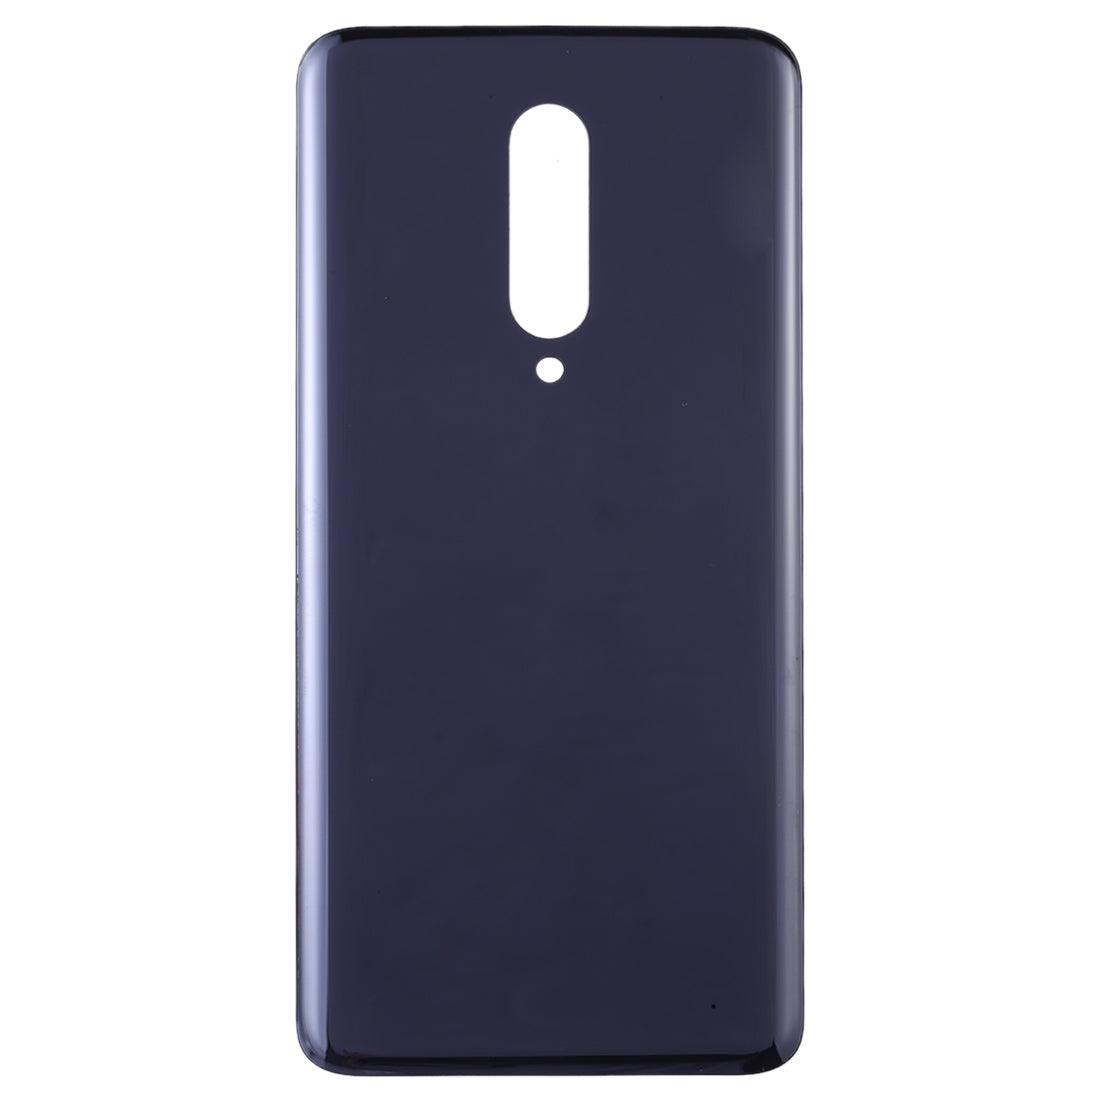 Back Glass Panel for Oneplus 7 Pro Mirror Grey or Black